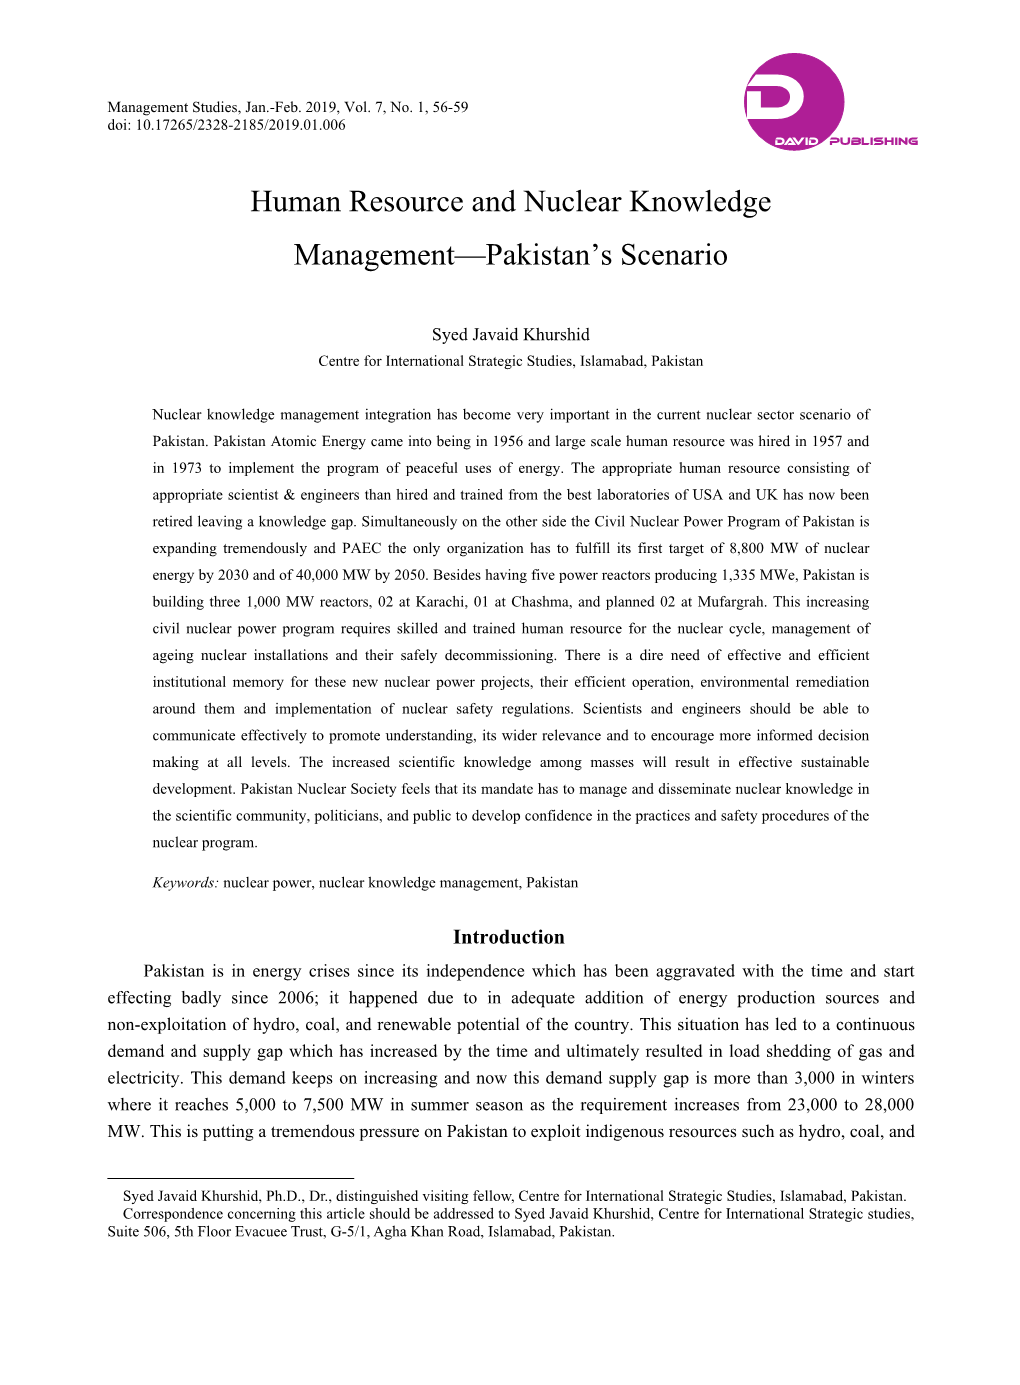 Human Resource and Nuclear Knowledge Management—Pakistan’S Scenario